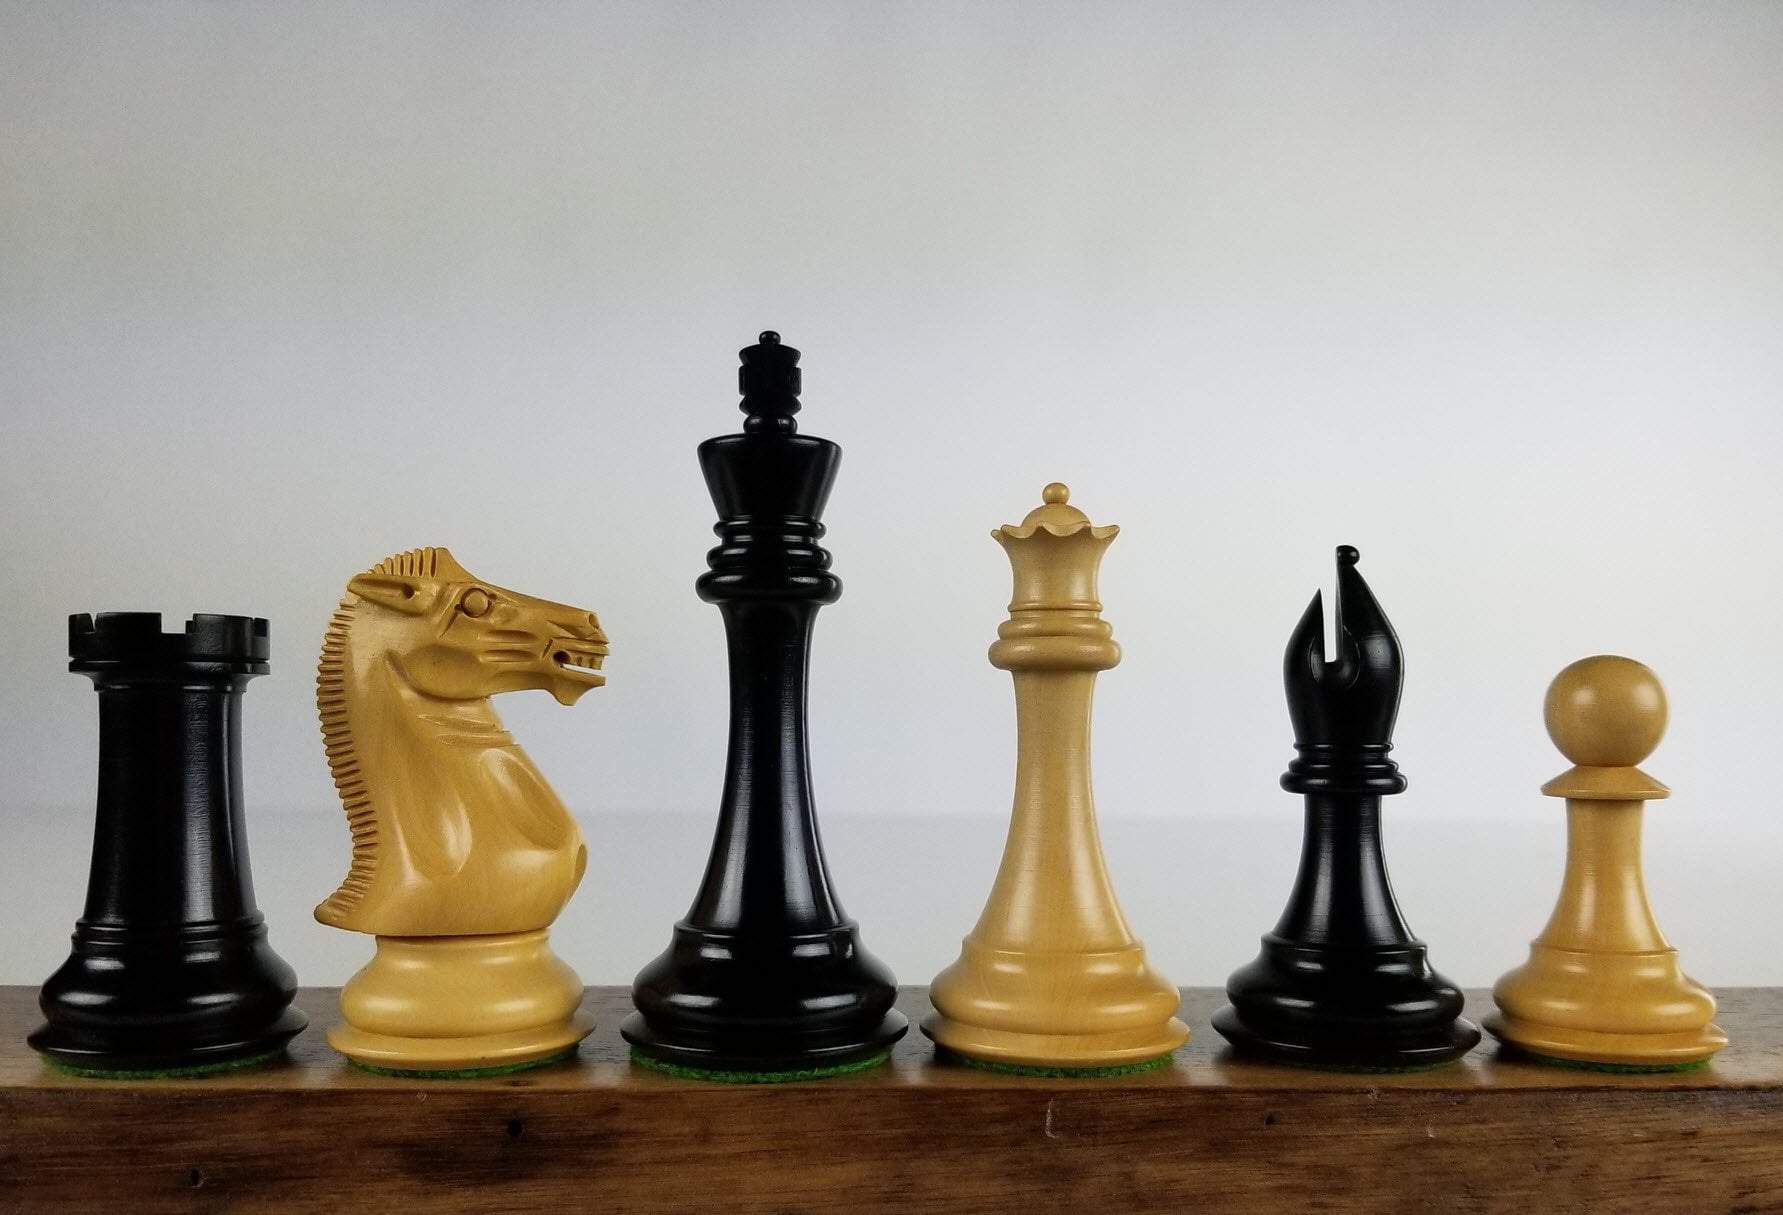 SINGLE REPLACEMENT PIECES: 4" Championship Design Chess Pieces in Ebony - Parts - Chess-House